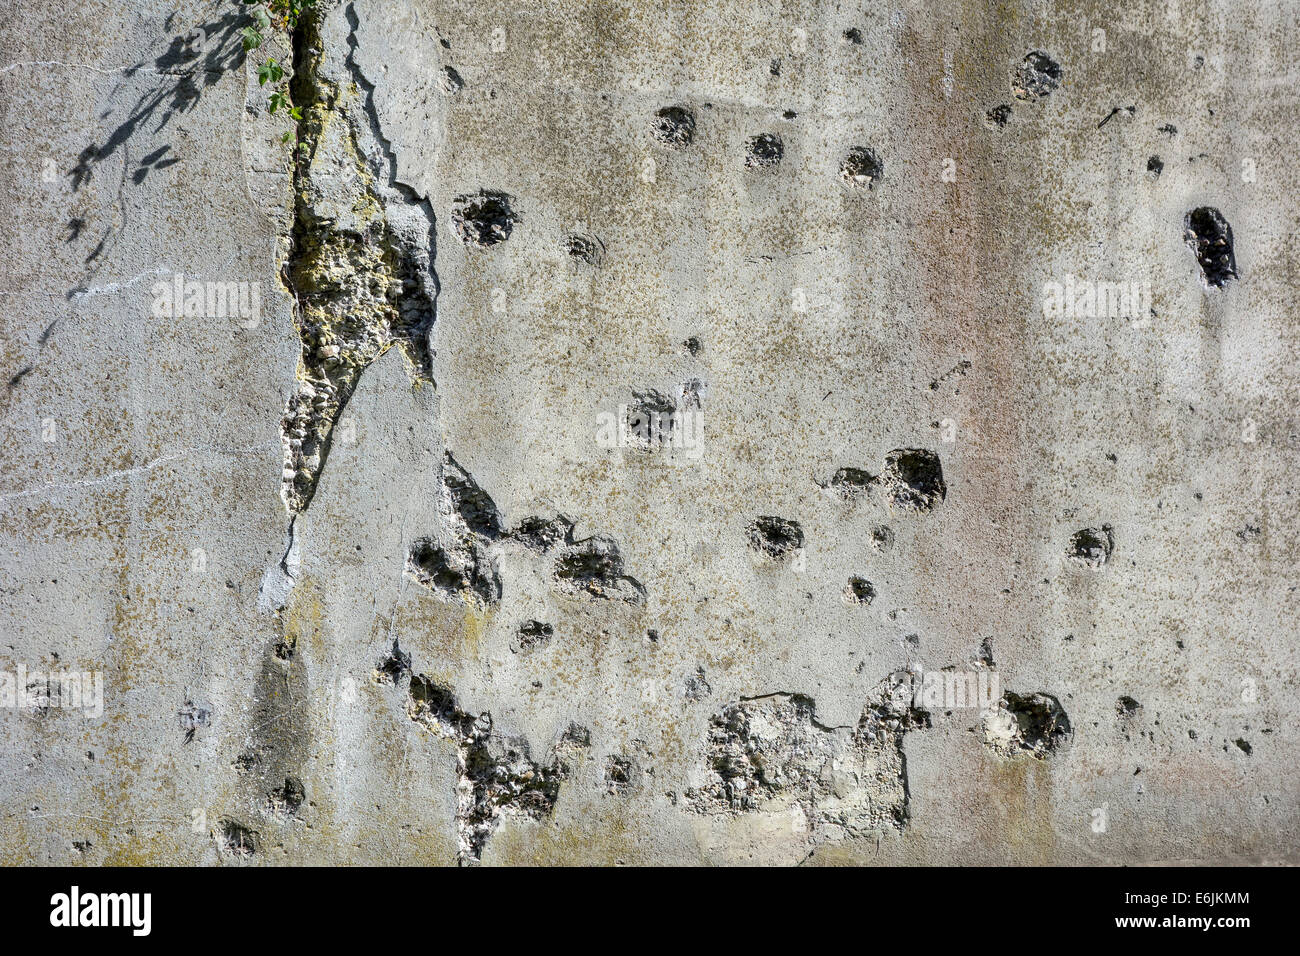 Bullet-scarred wall in the Fort de Loncin, one of twelve forts built as part of the Fortifications of Liège during WWI, Belgium Stock Photo